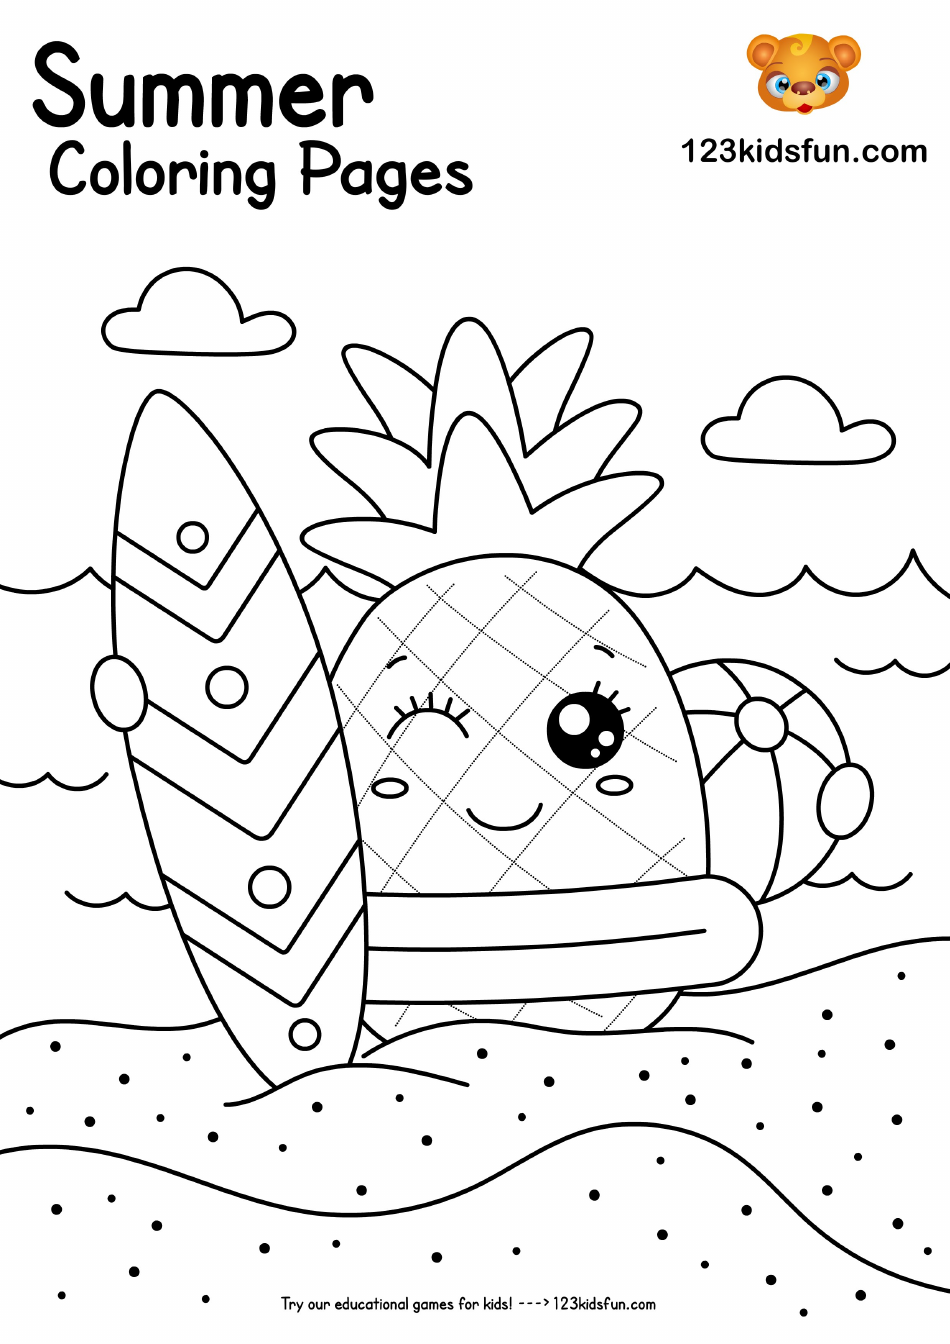 Summer Coloring Page - Pineapple on a Beach Download Printable PDF ...